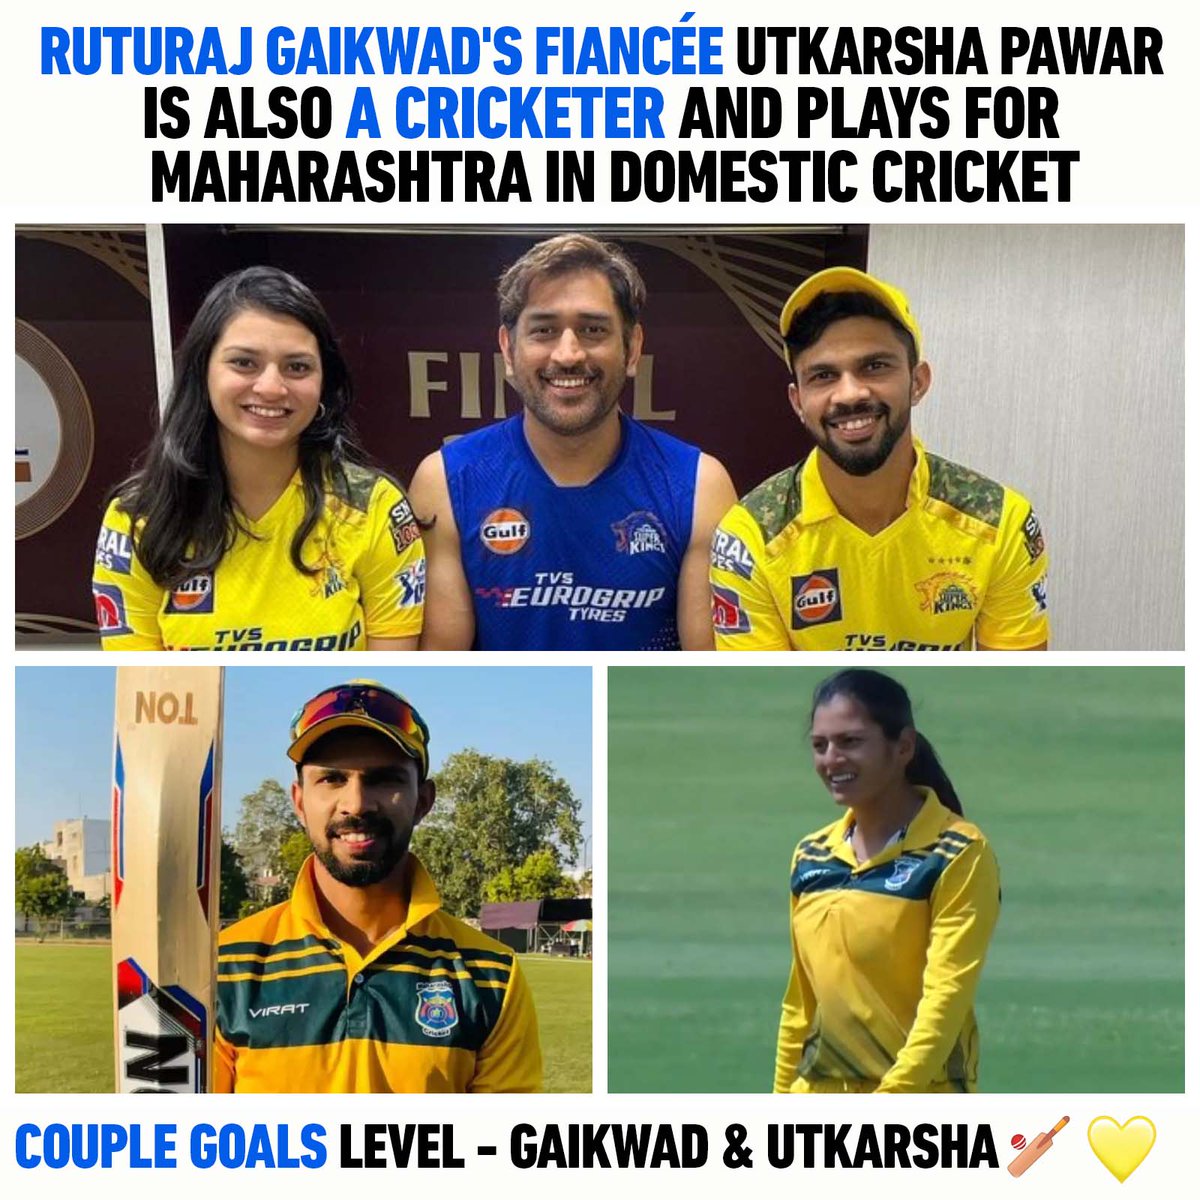 They are giving some serious couple goals.

#RuturajGaikwad #UtkarshaPawar #Marriage #CSK #IPL